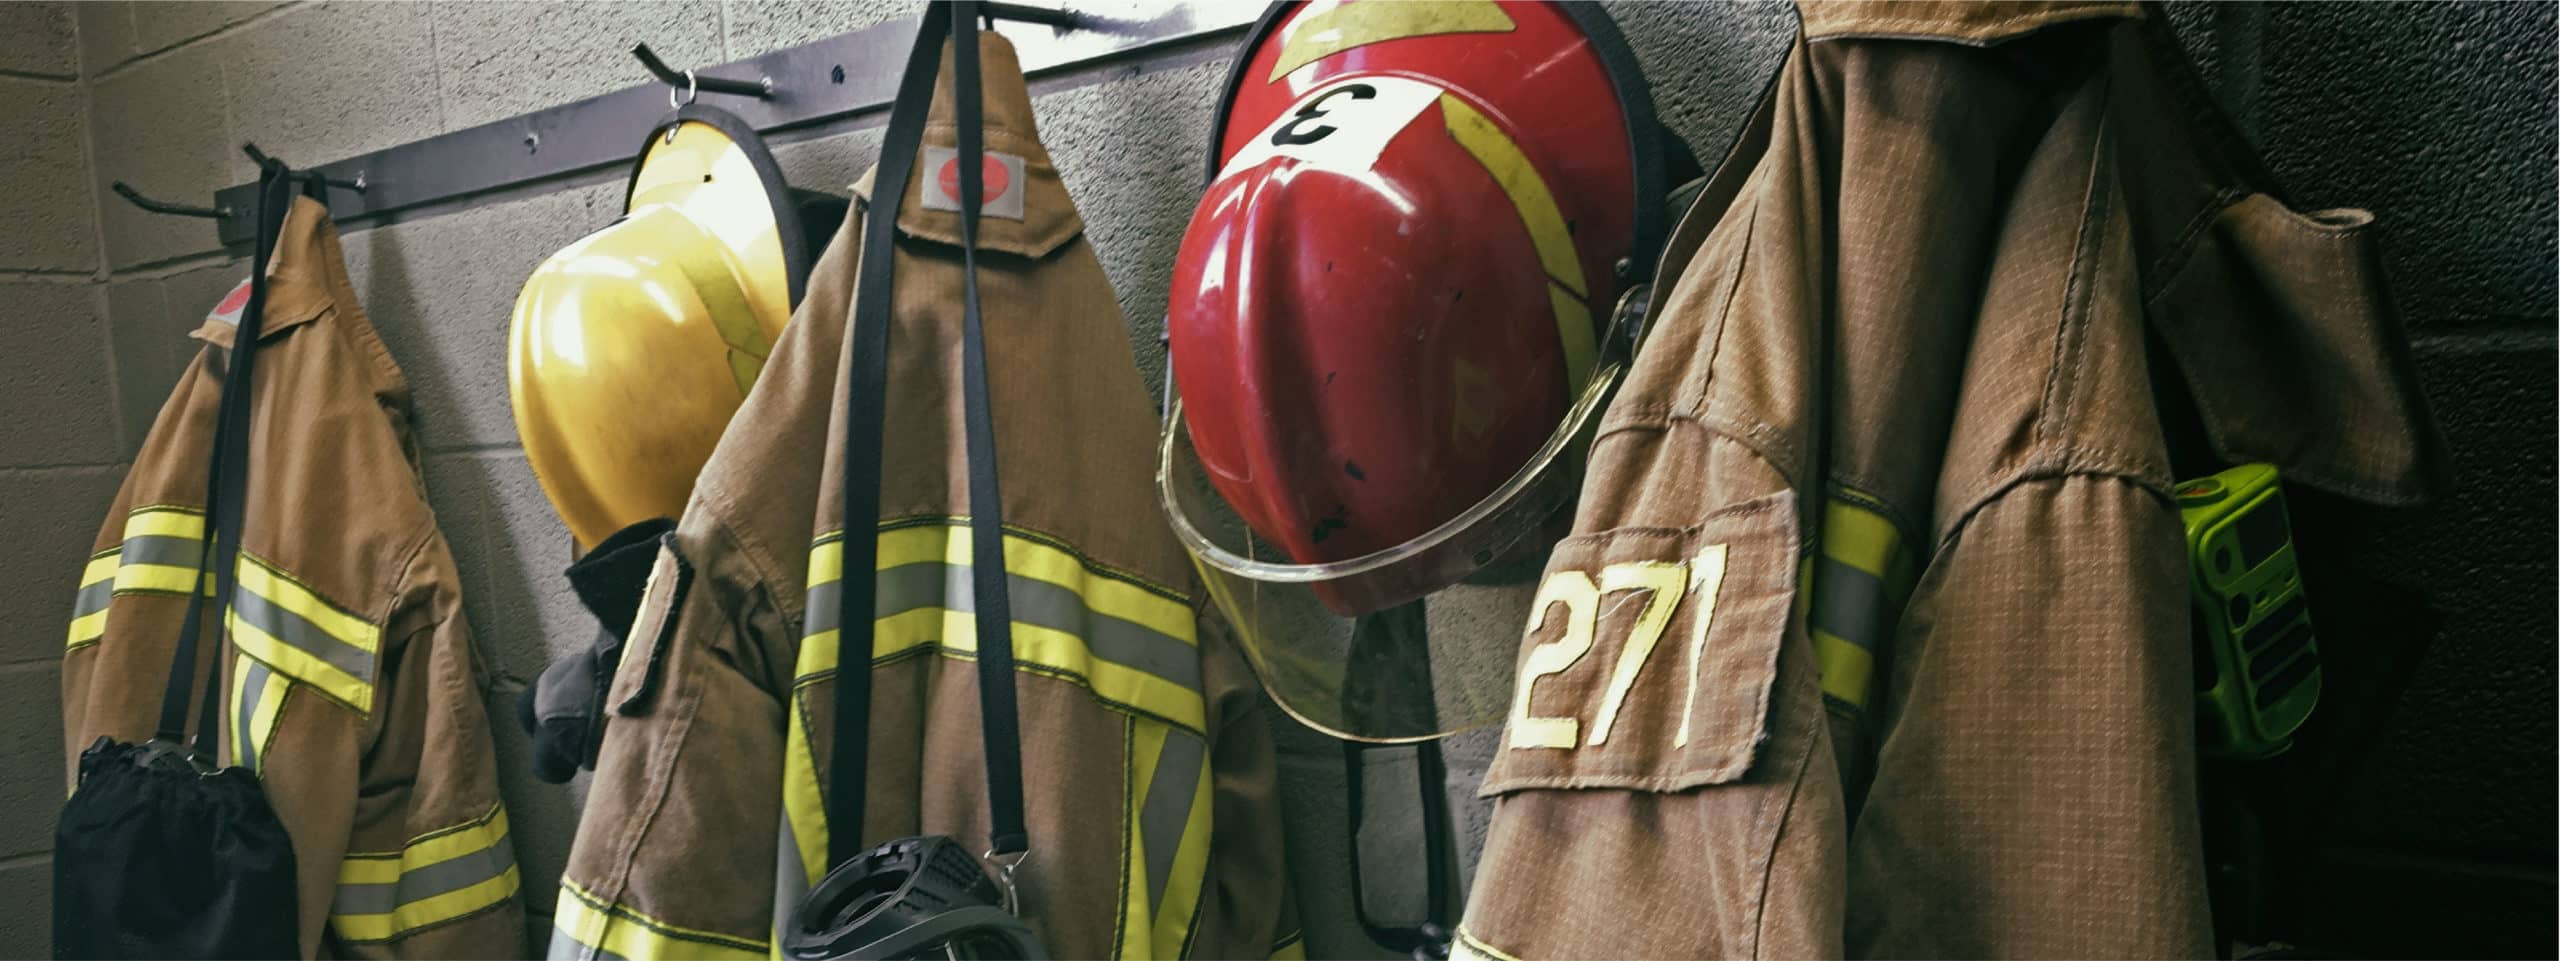 Fire Fighter uniforms hanging up